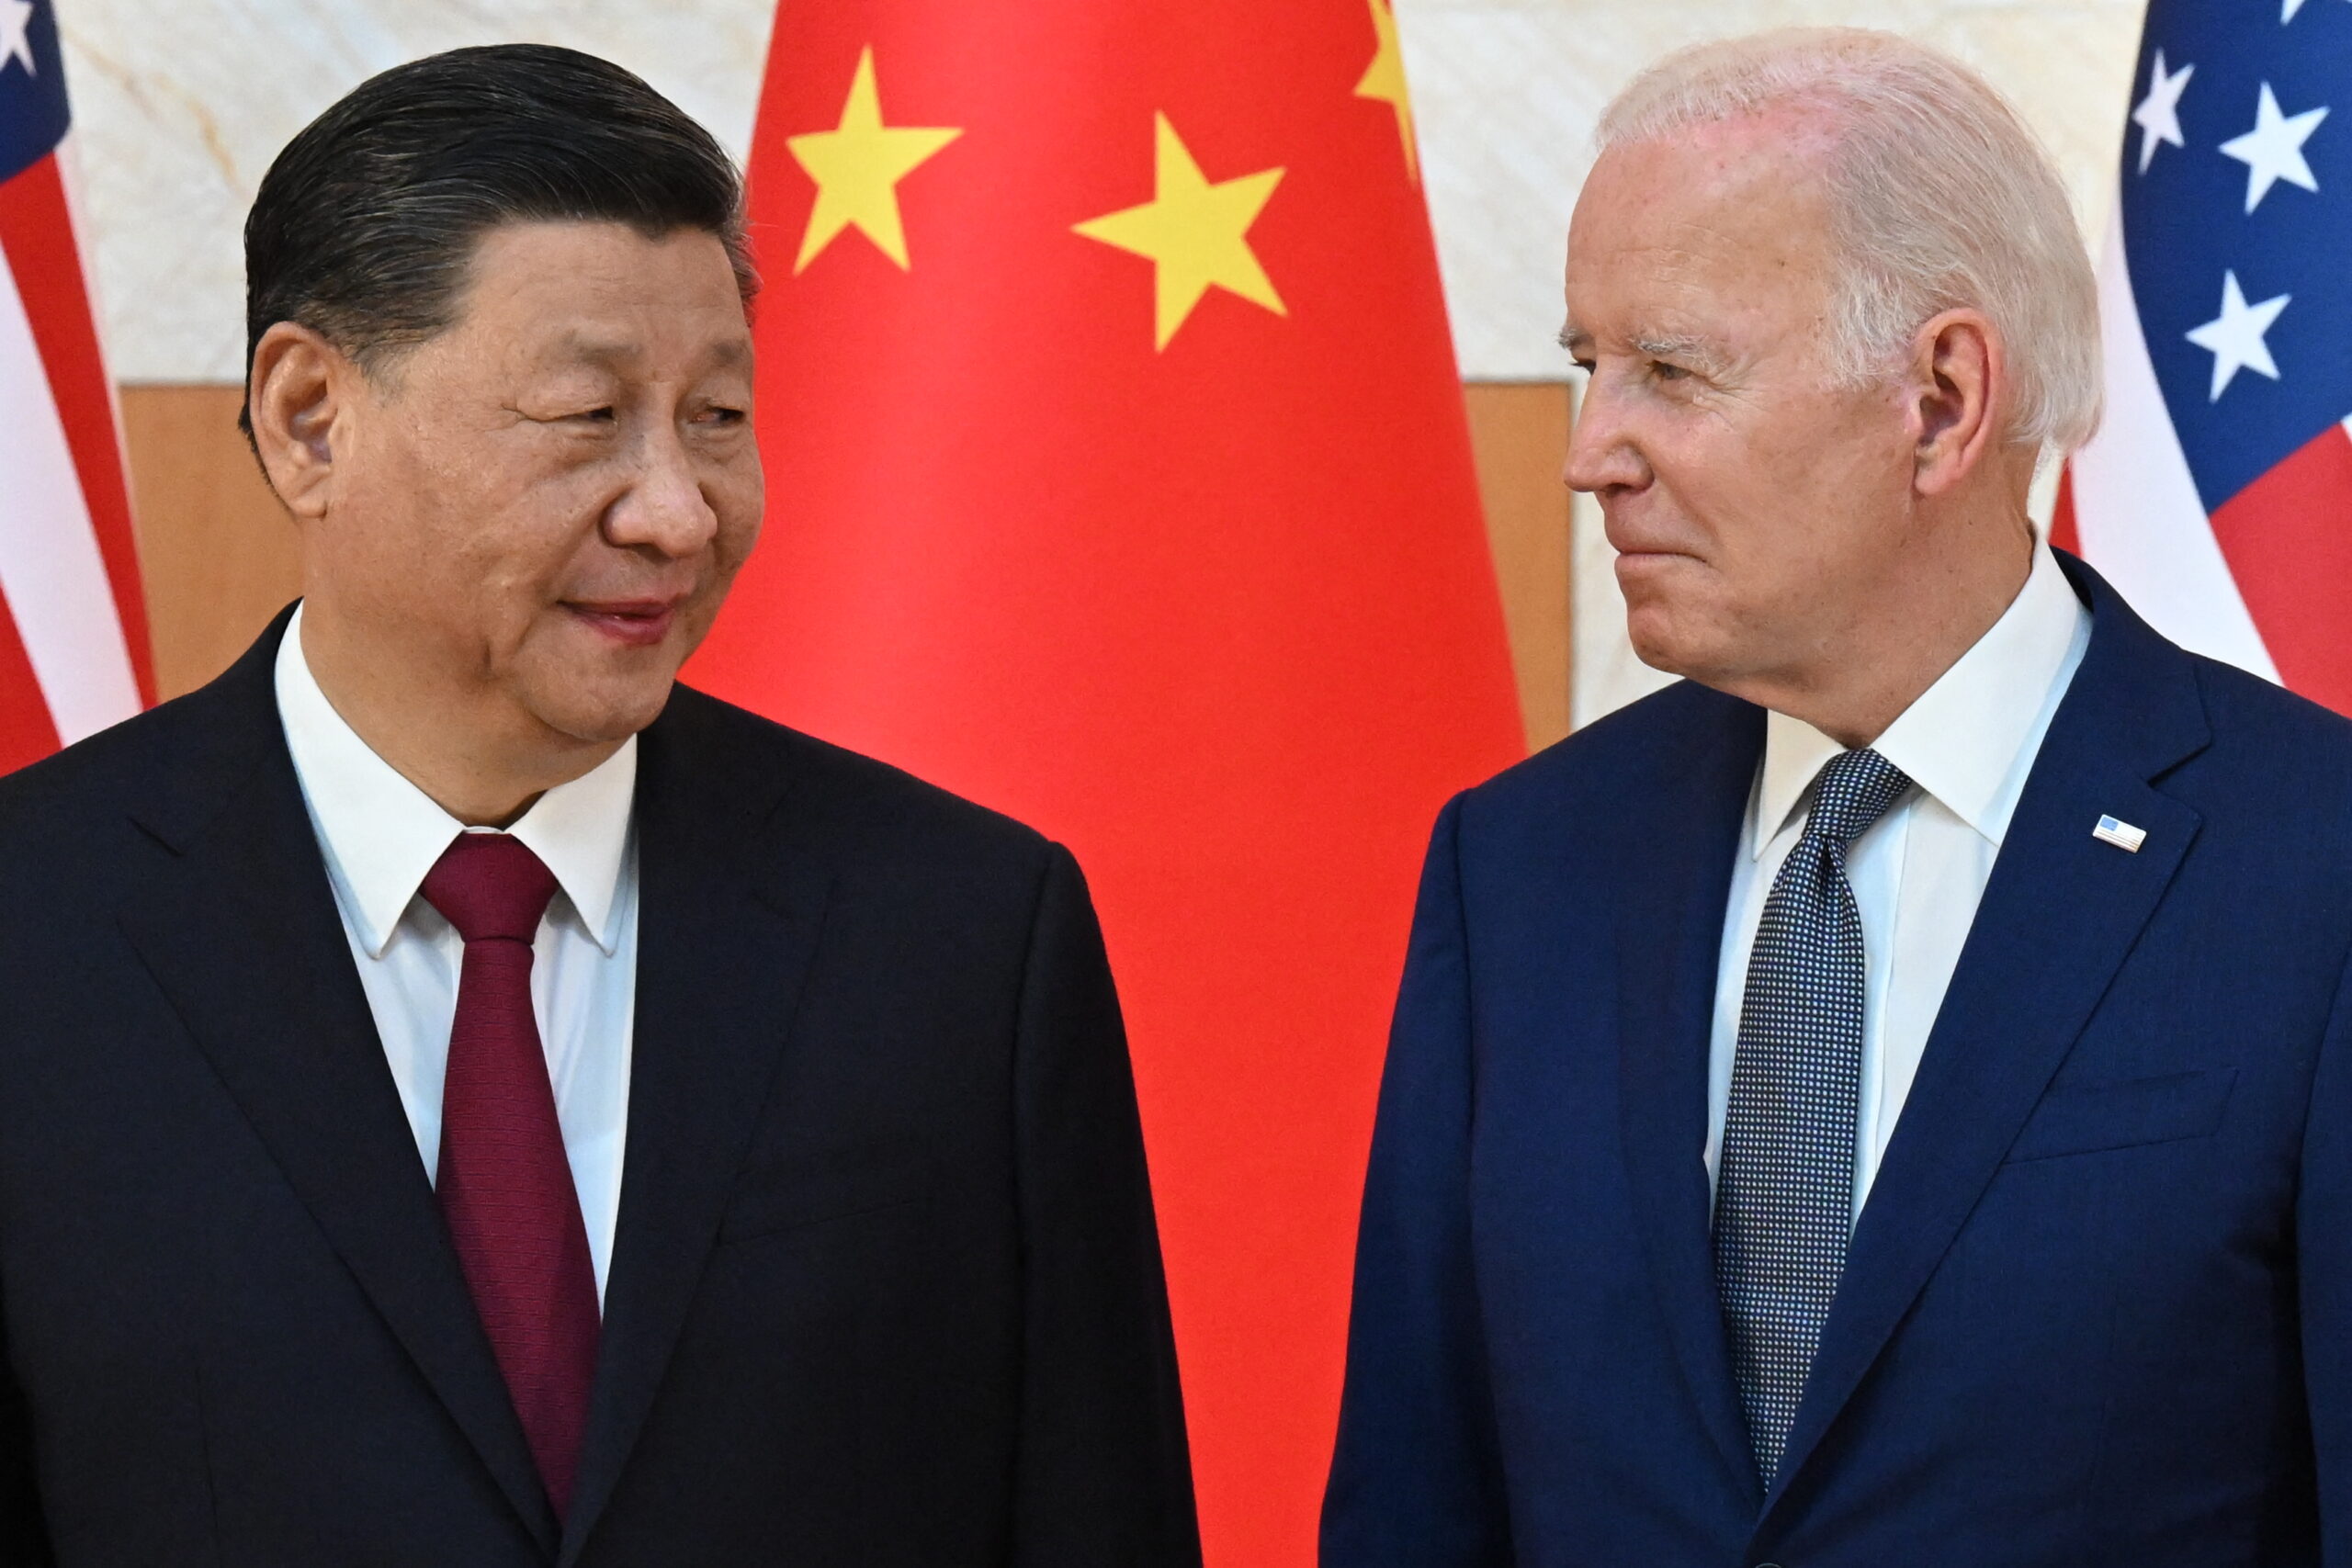 China expert warns of potential tension escalation due to Biden administration’s handling of spy balloons, police stations, and fentanyl. Brace yourself for a bumpy ride!